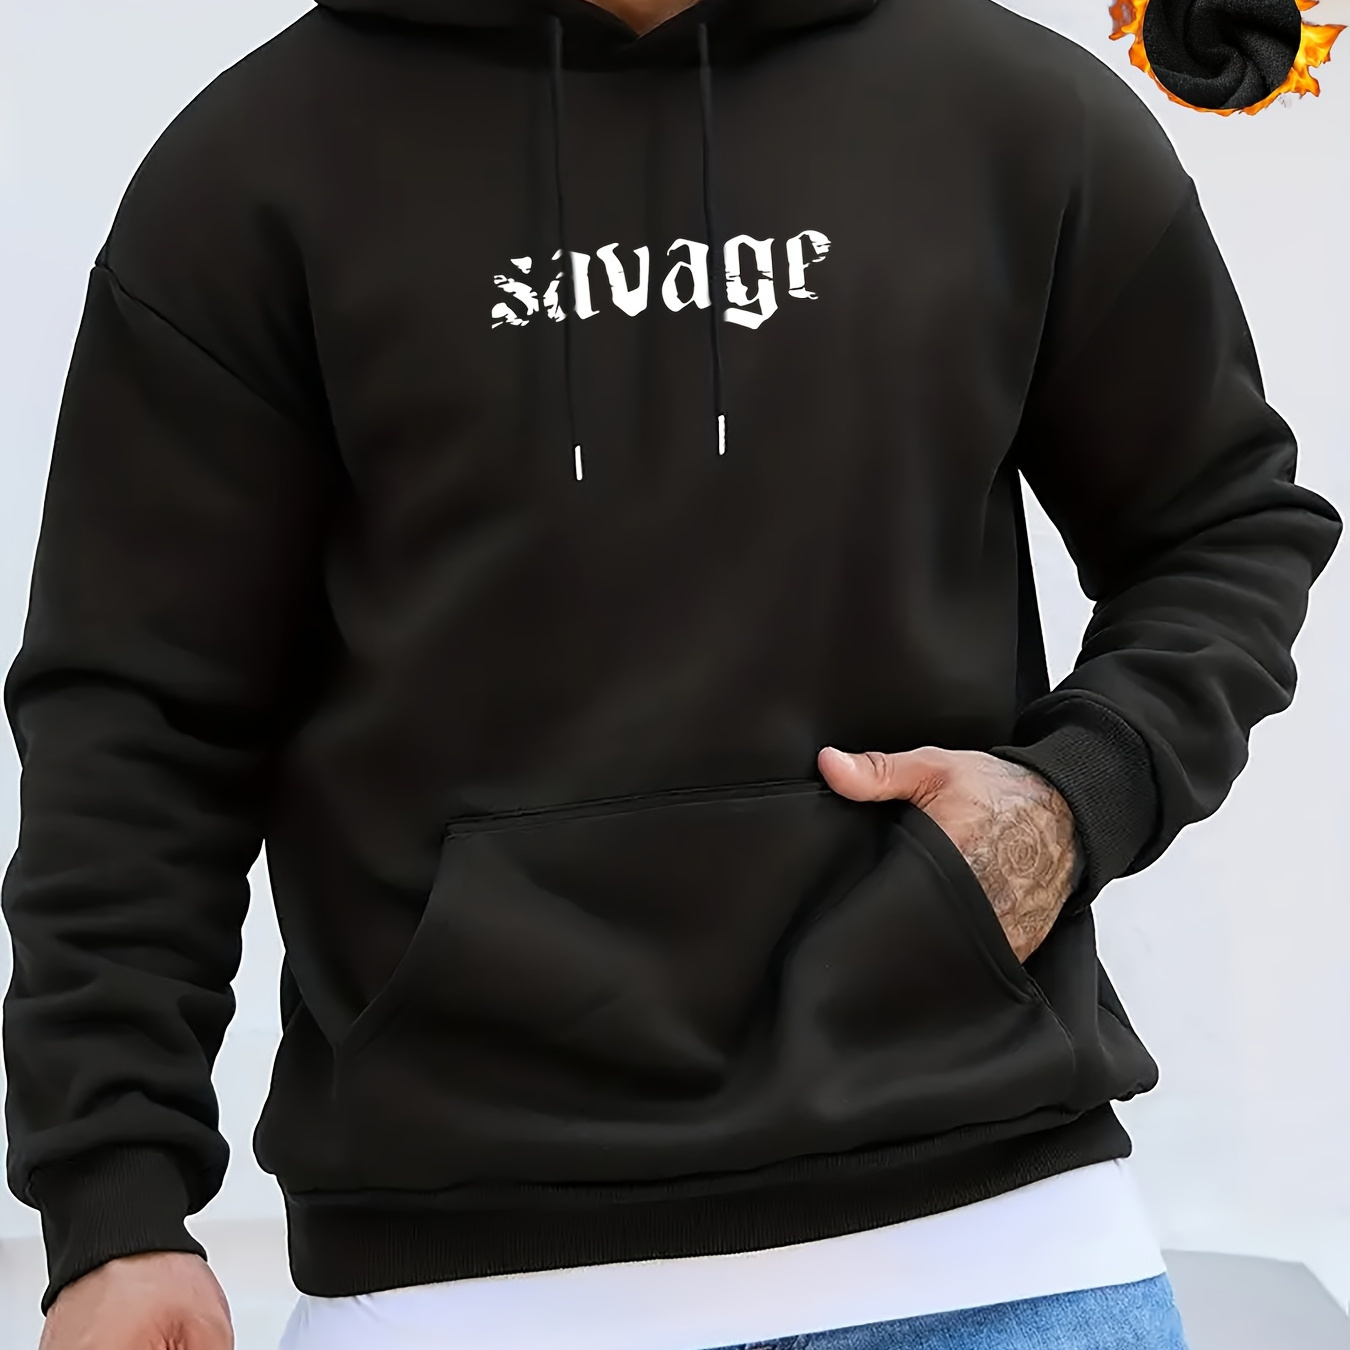 

Savage Print Men's Hoodie, Fashion Street Style Comfy Sweatshirts With Pockets, Hooded Long Sleeve Graphic Pullover Tops, Casual Sports Tops